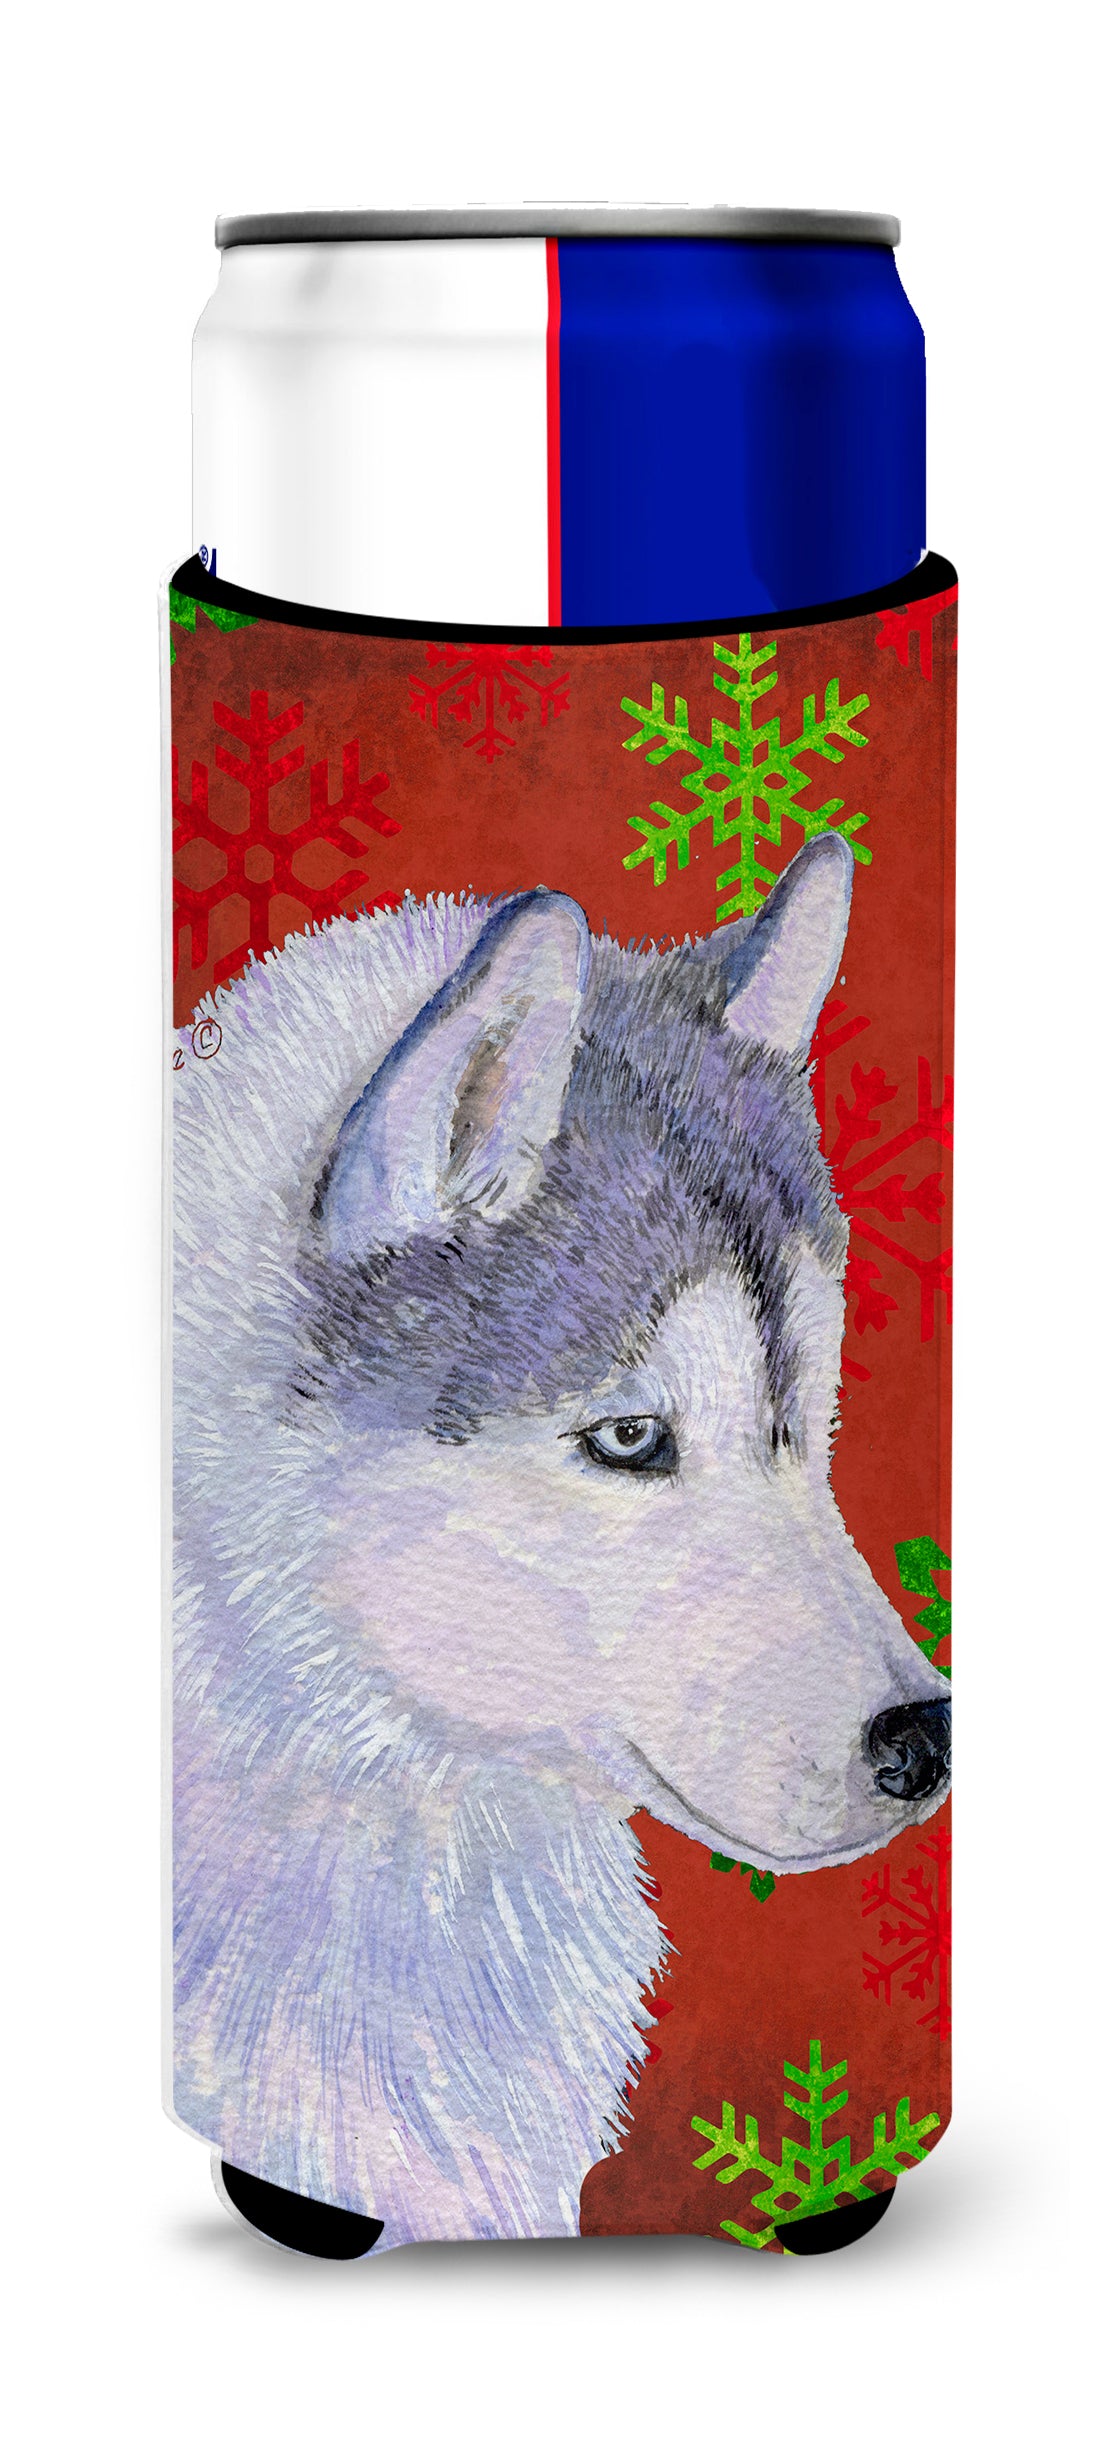 Siberian Husky Red Green Snowflake Holiday Christmas Ultra Beverage Insulators for slim cans SS4671MUK.